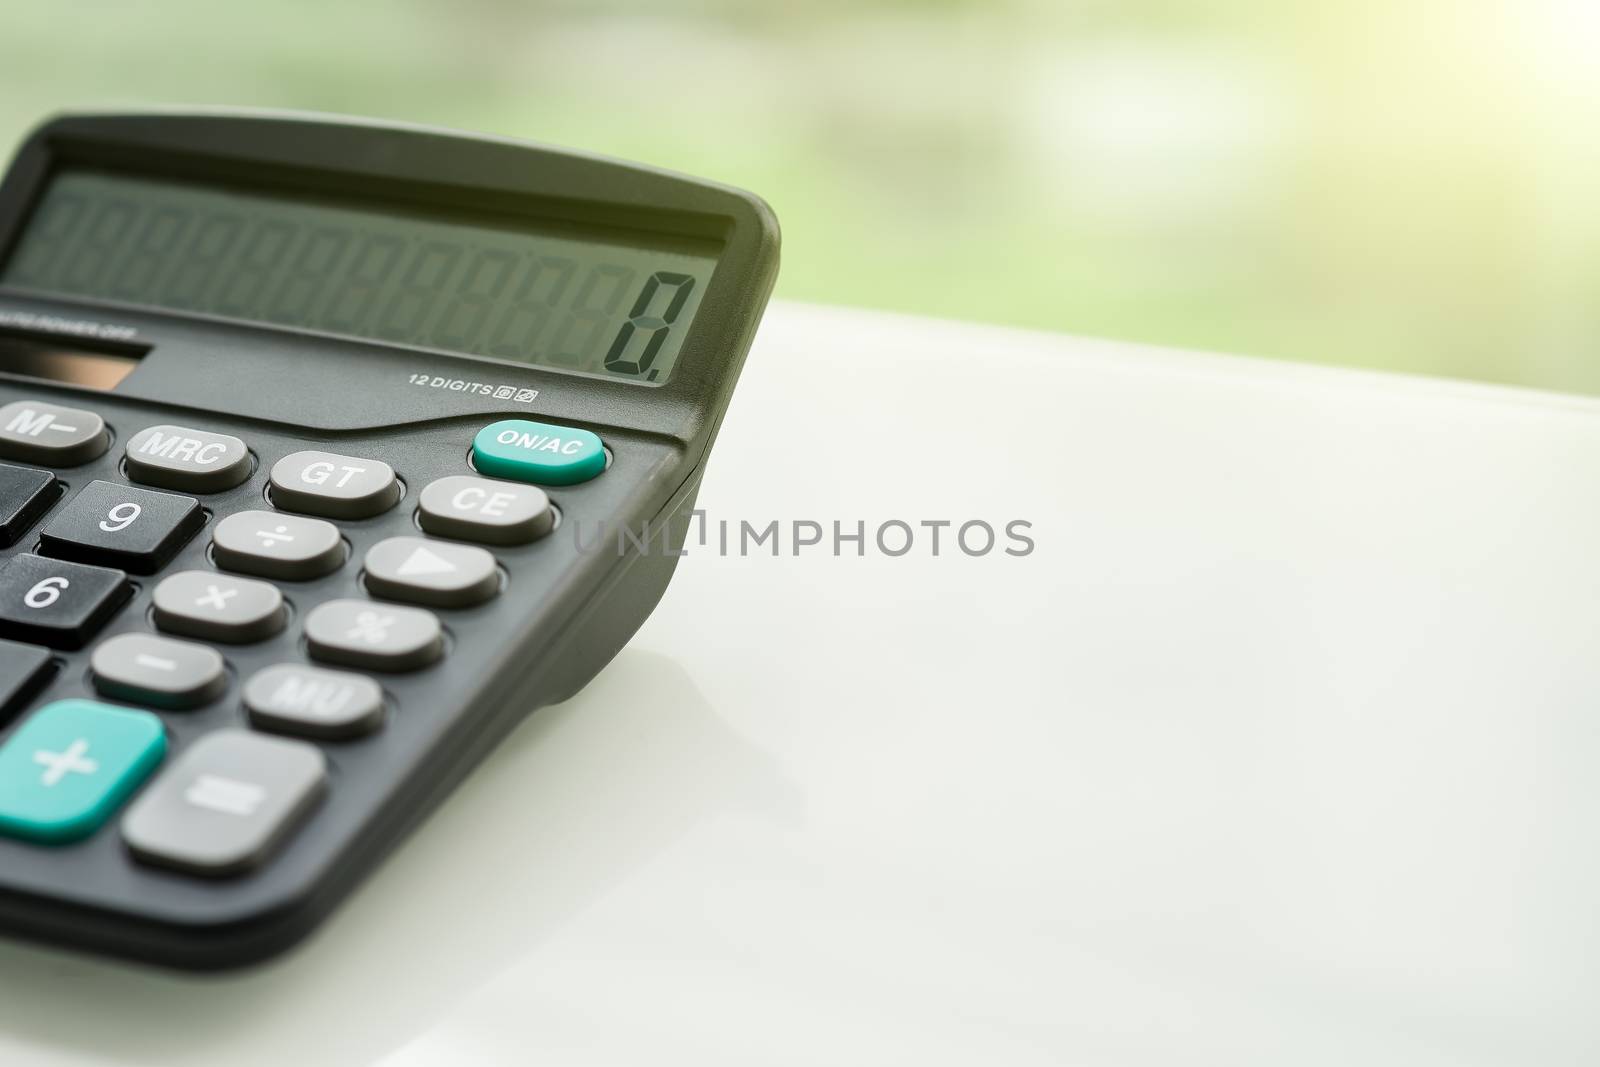 Calculator on the white table near window, closeup sideview isolated